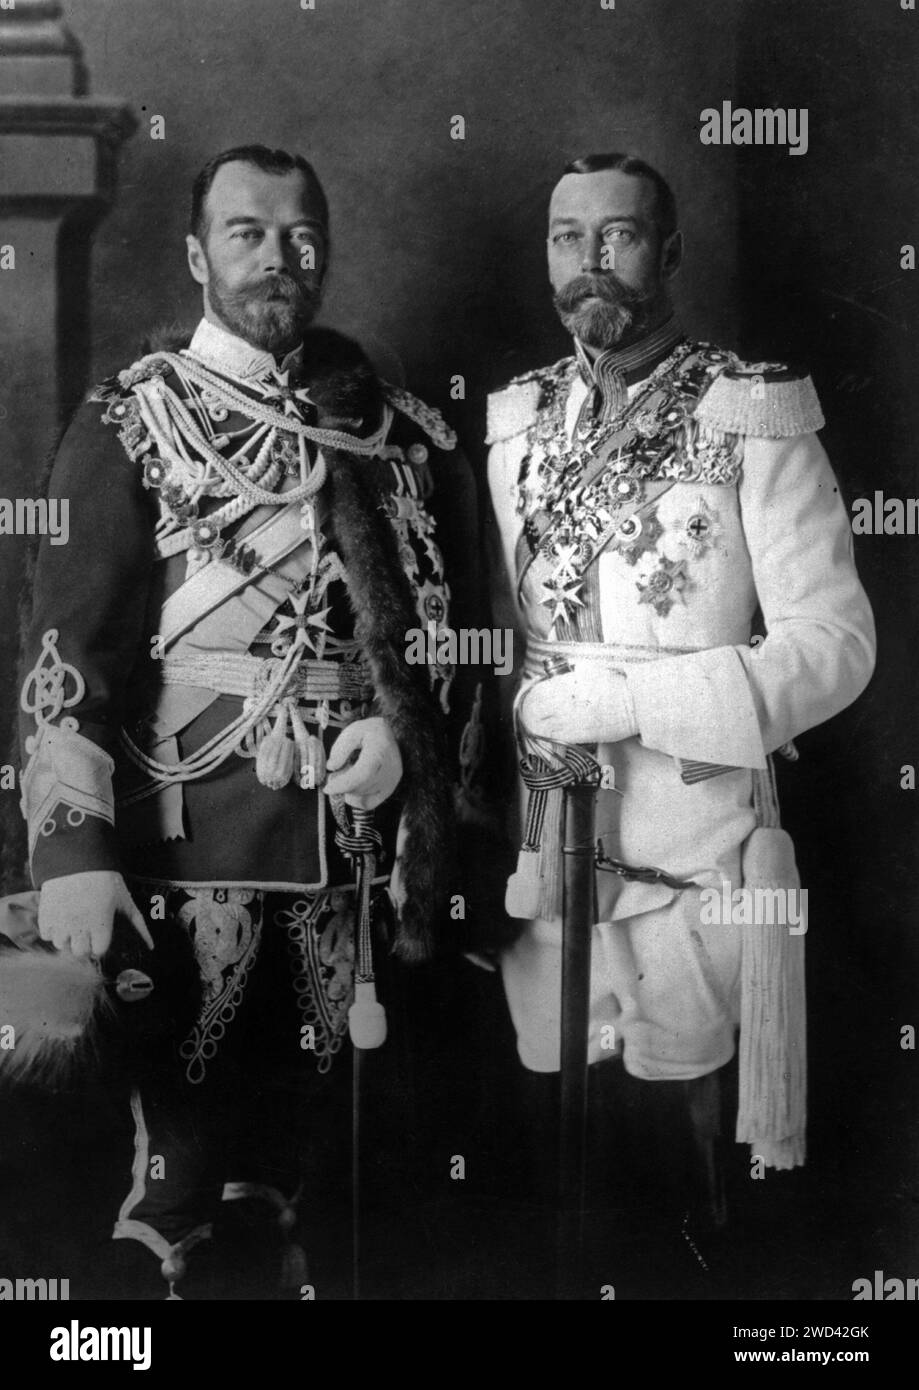 BERLIN, GERMANY - 24 May 1913 - Formal portrait of Tsar Nicholas II of Russia ( 1868 - 1918 ), left, with King George V of England ( 1865 - 1936 ), ri Stock Photo